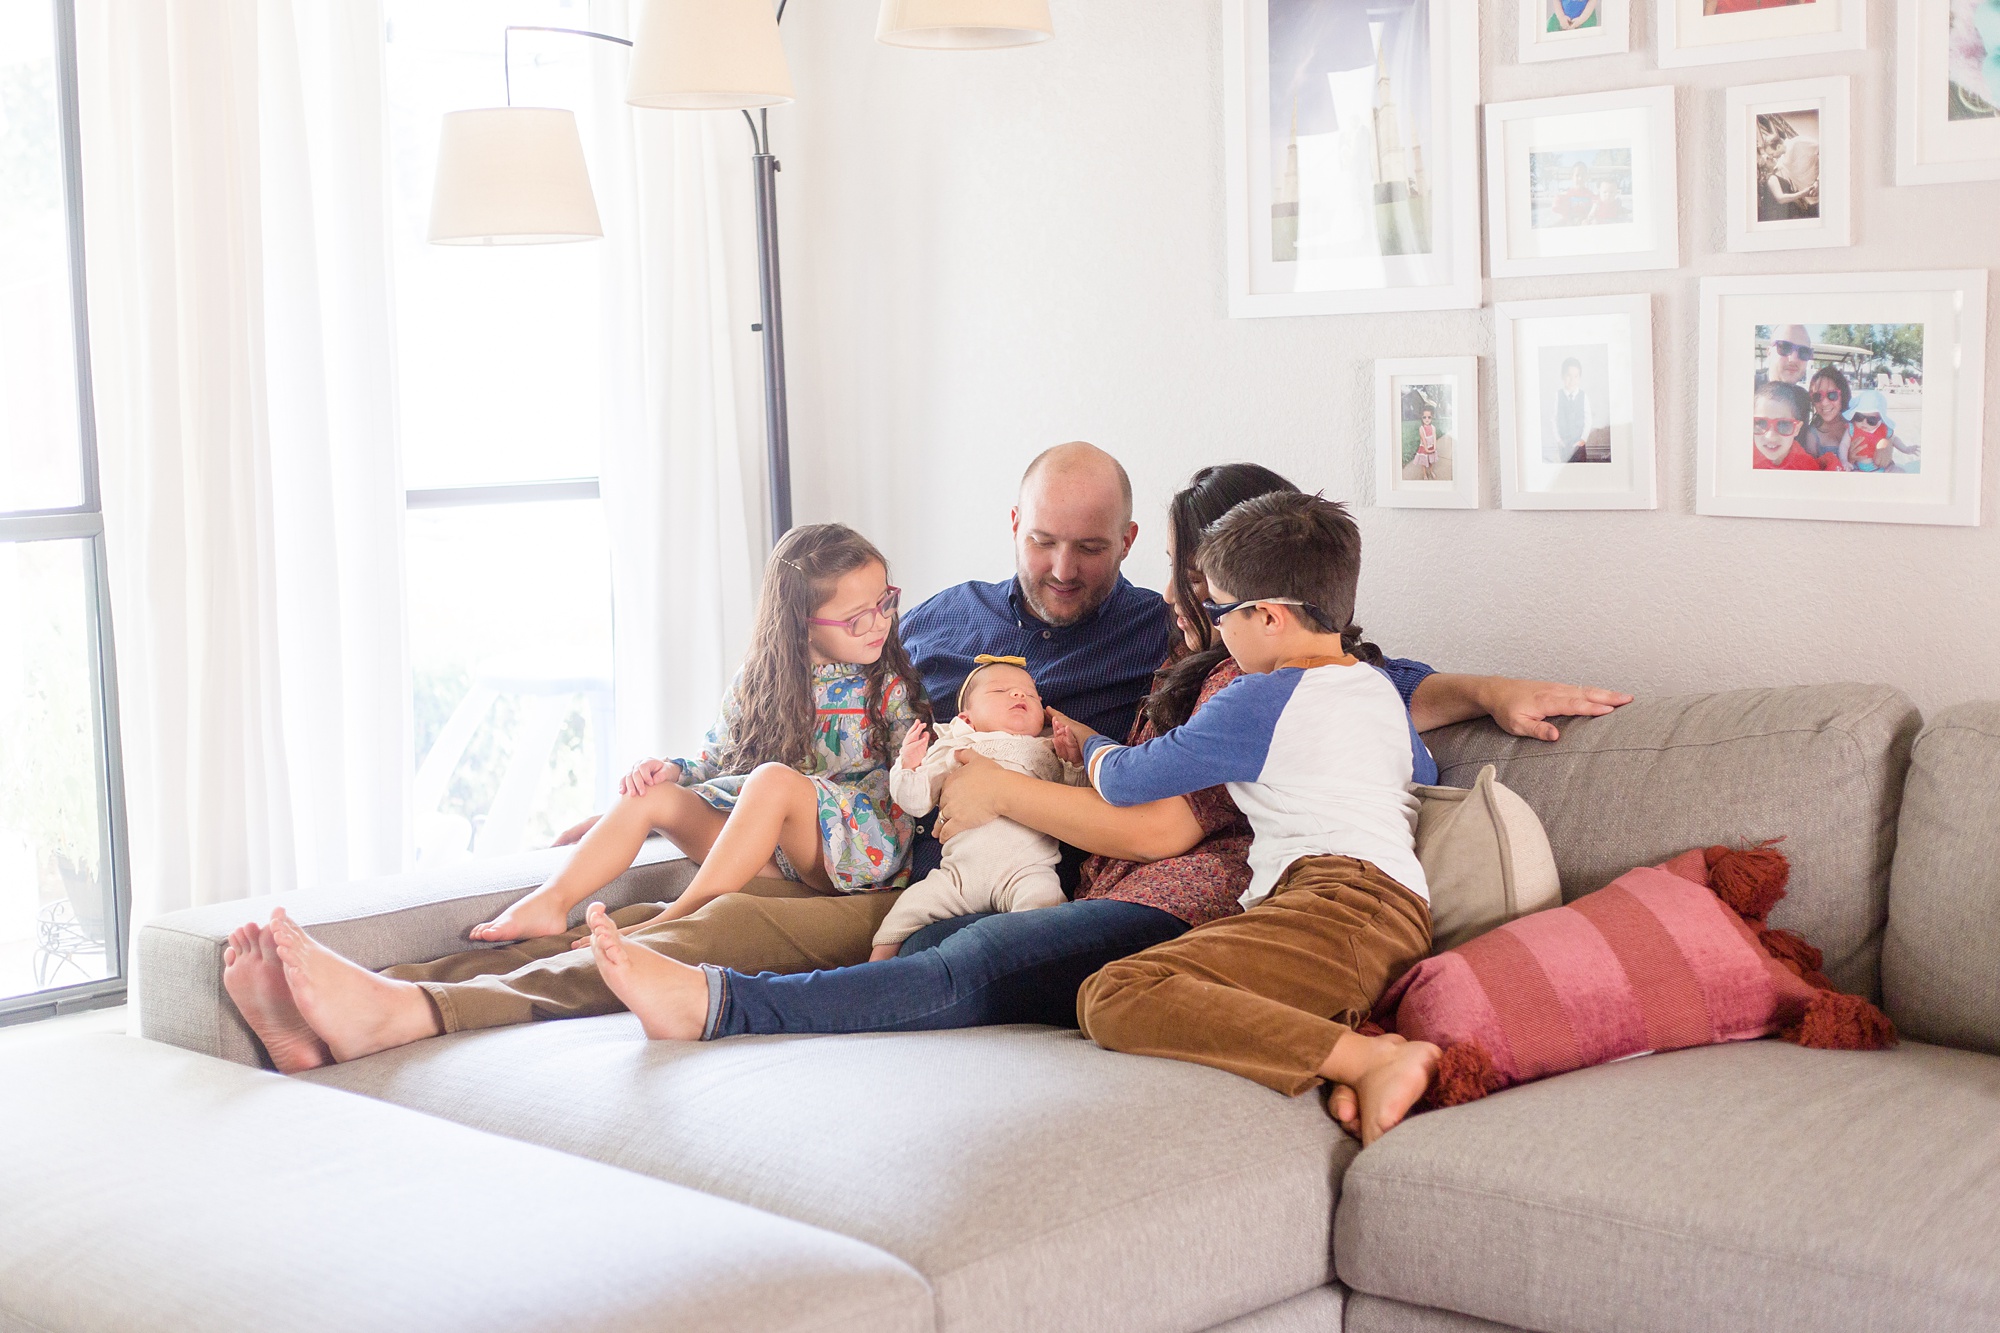 newborn portraits for family of five at home